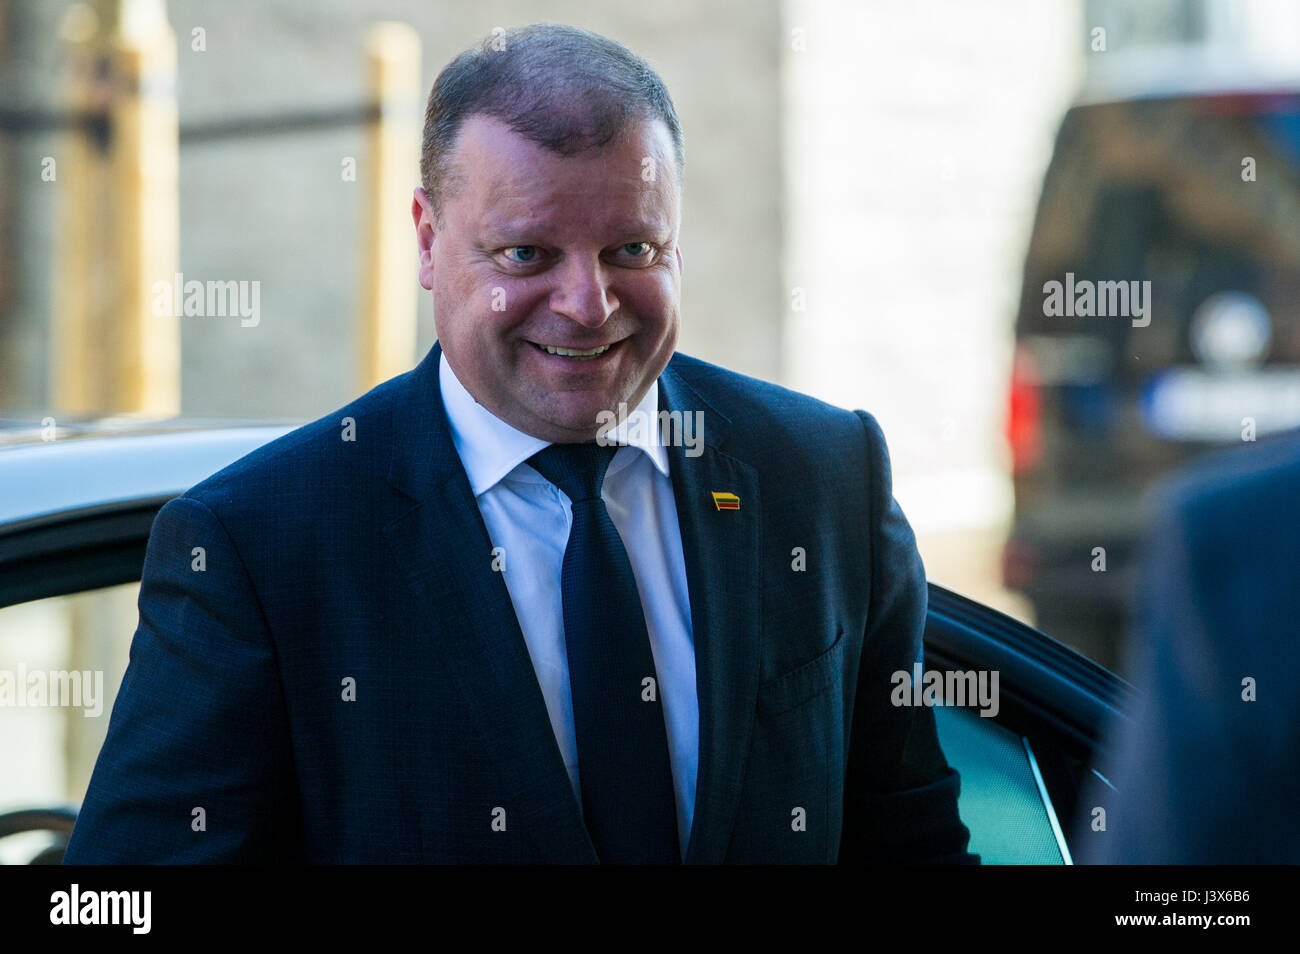 Tallinn, Estonia, 8th May 2017. Lithuania Saulius Skvernelis arrives to a meeting with his Baltics and Polish counterparts. Prime Minister of Estonia Juri Ratas, Prime Minister of Latvia Maris Kucinskis, Prime Minister of Lithuania Saulius Skvernelis and Prime Minister of Poland Beata Szydlo meet in Tallinn today. The topics of the meeting were regional security, energy community, transport connections and the future of the European Union. Credit: Nicolas Bouvy/Alamy Live News Stock Photo